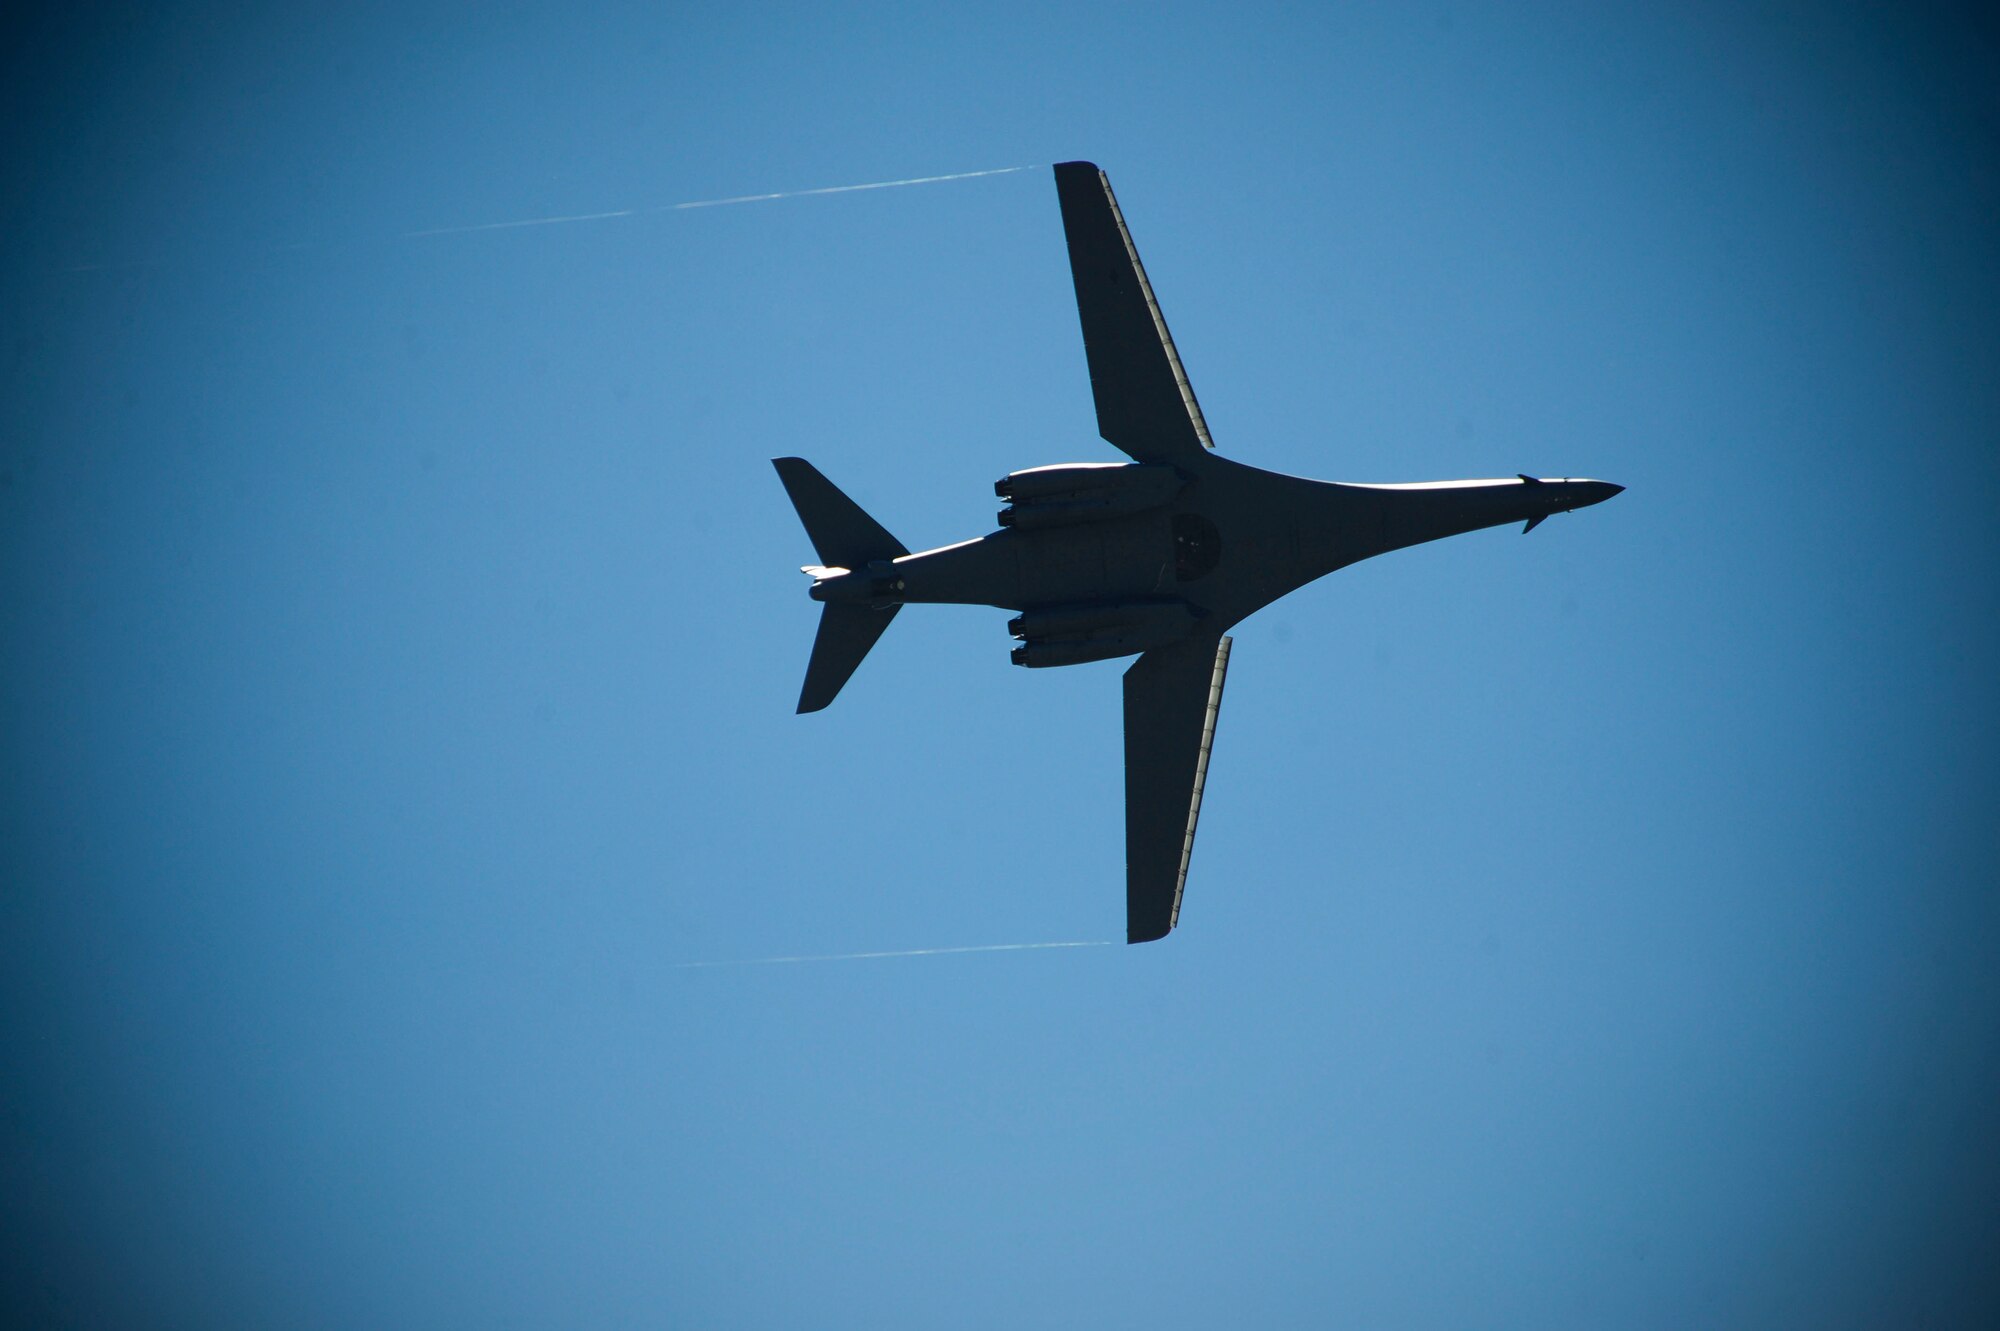 ELLSWORTH AIR FORCE BASE, S.D. – A B-1B Lancer flies during a phase II operational readiness exercise, July 20. B-1’s carry the largest payload of both guided and unguided weapons in the Air Force inventory. (U.S. Air Force photo/Airman 1st Class Corey Hook)